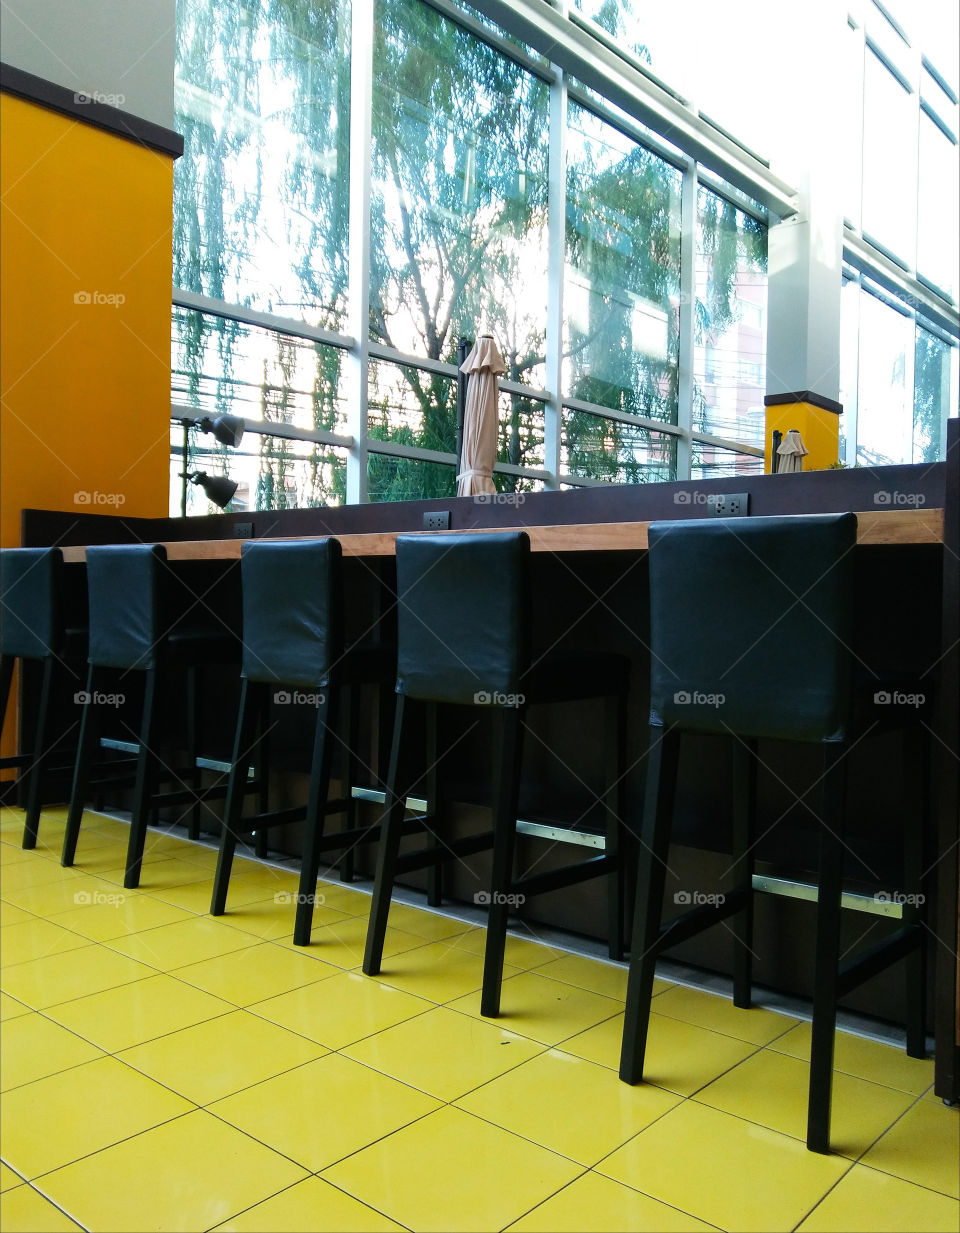 Black high chairs and counter on yellow floor.